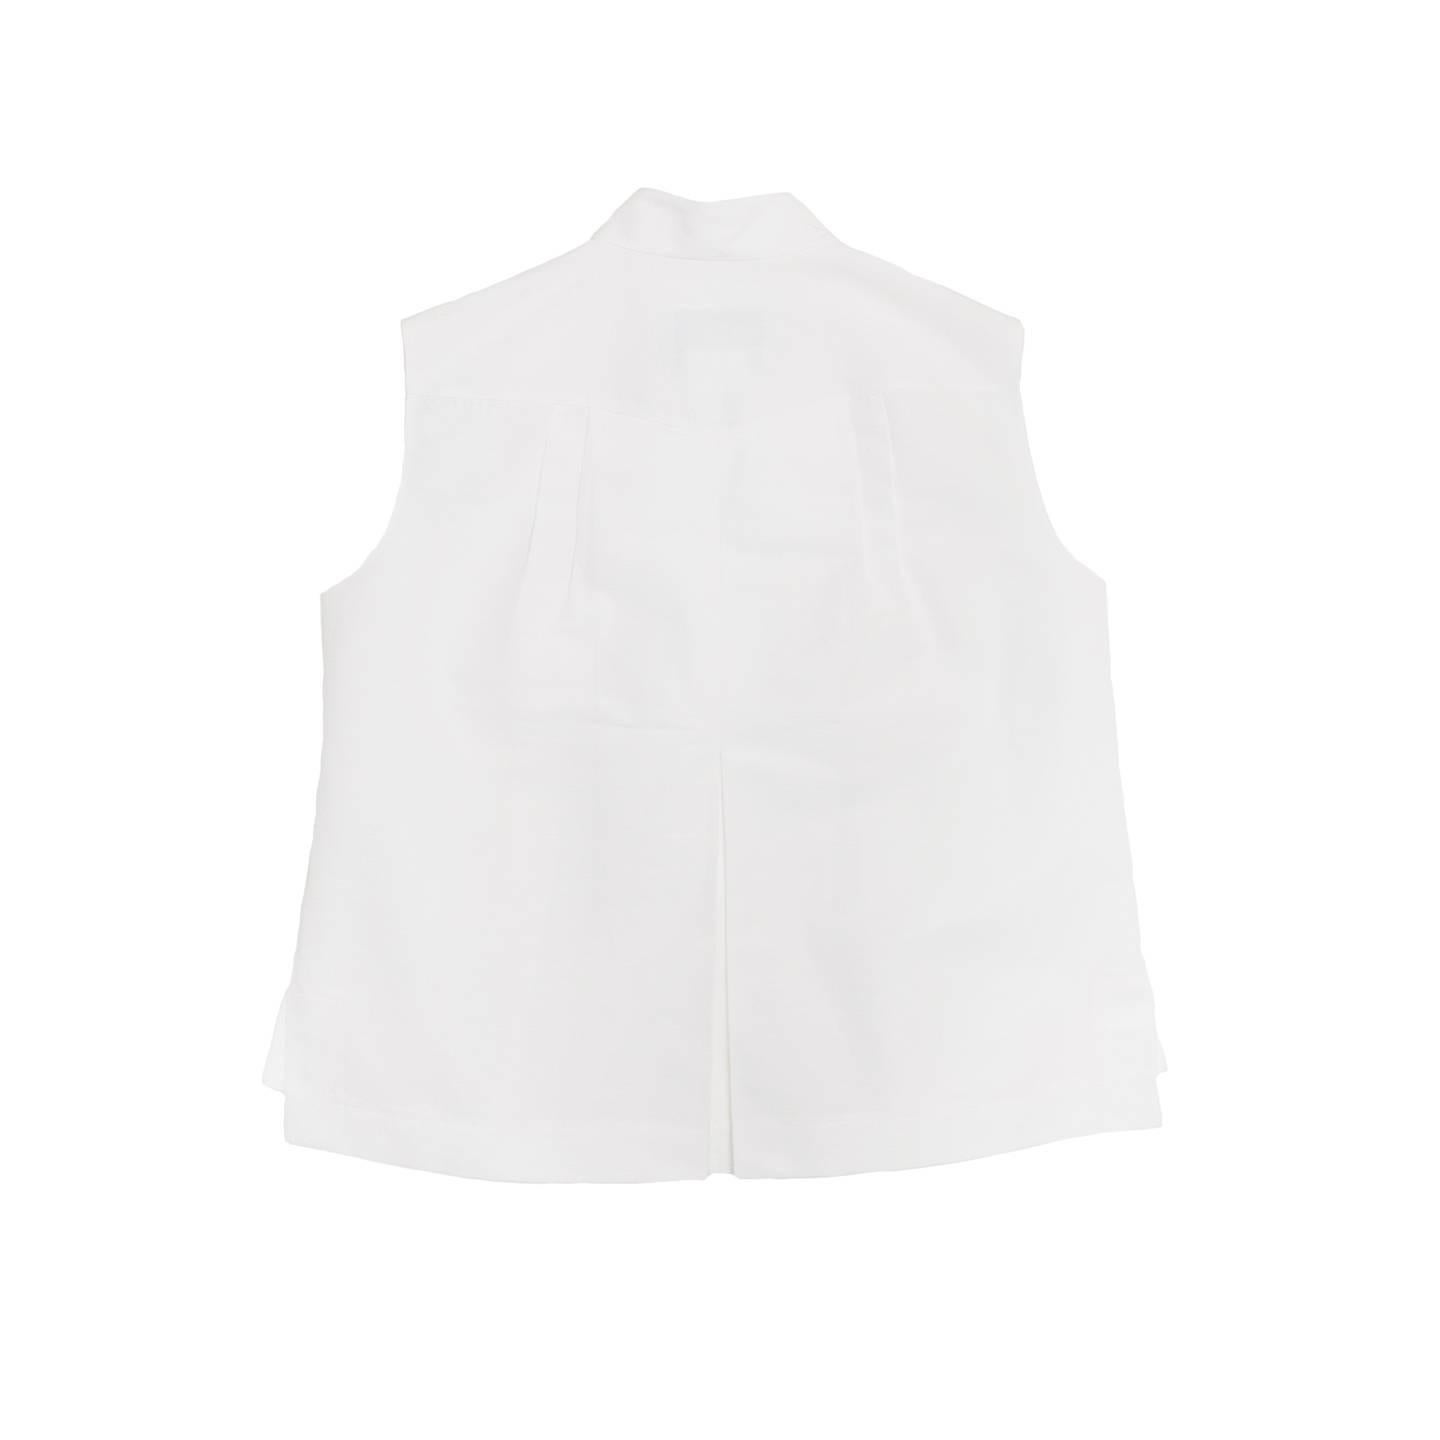 Gray Chanel White Sleeveless Top or Jacket With Bow Detail